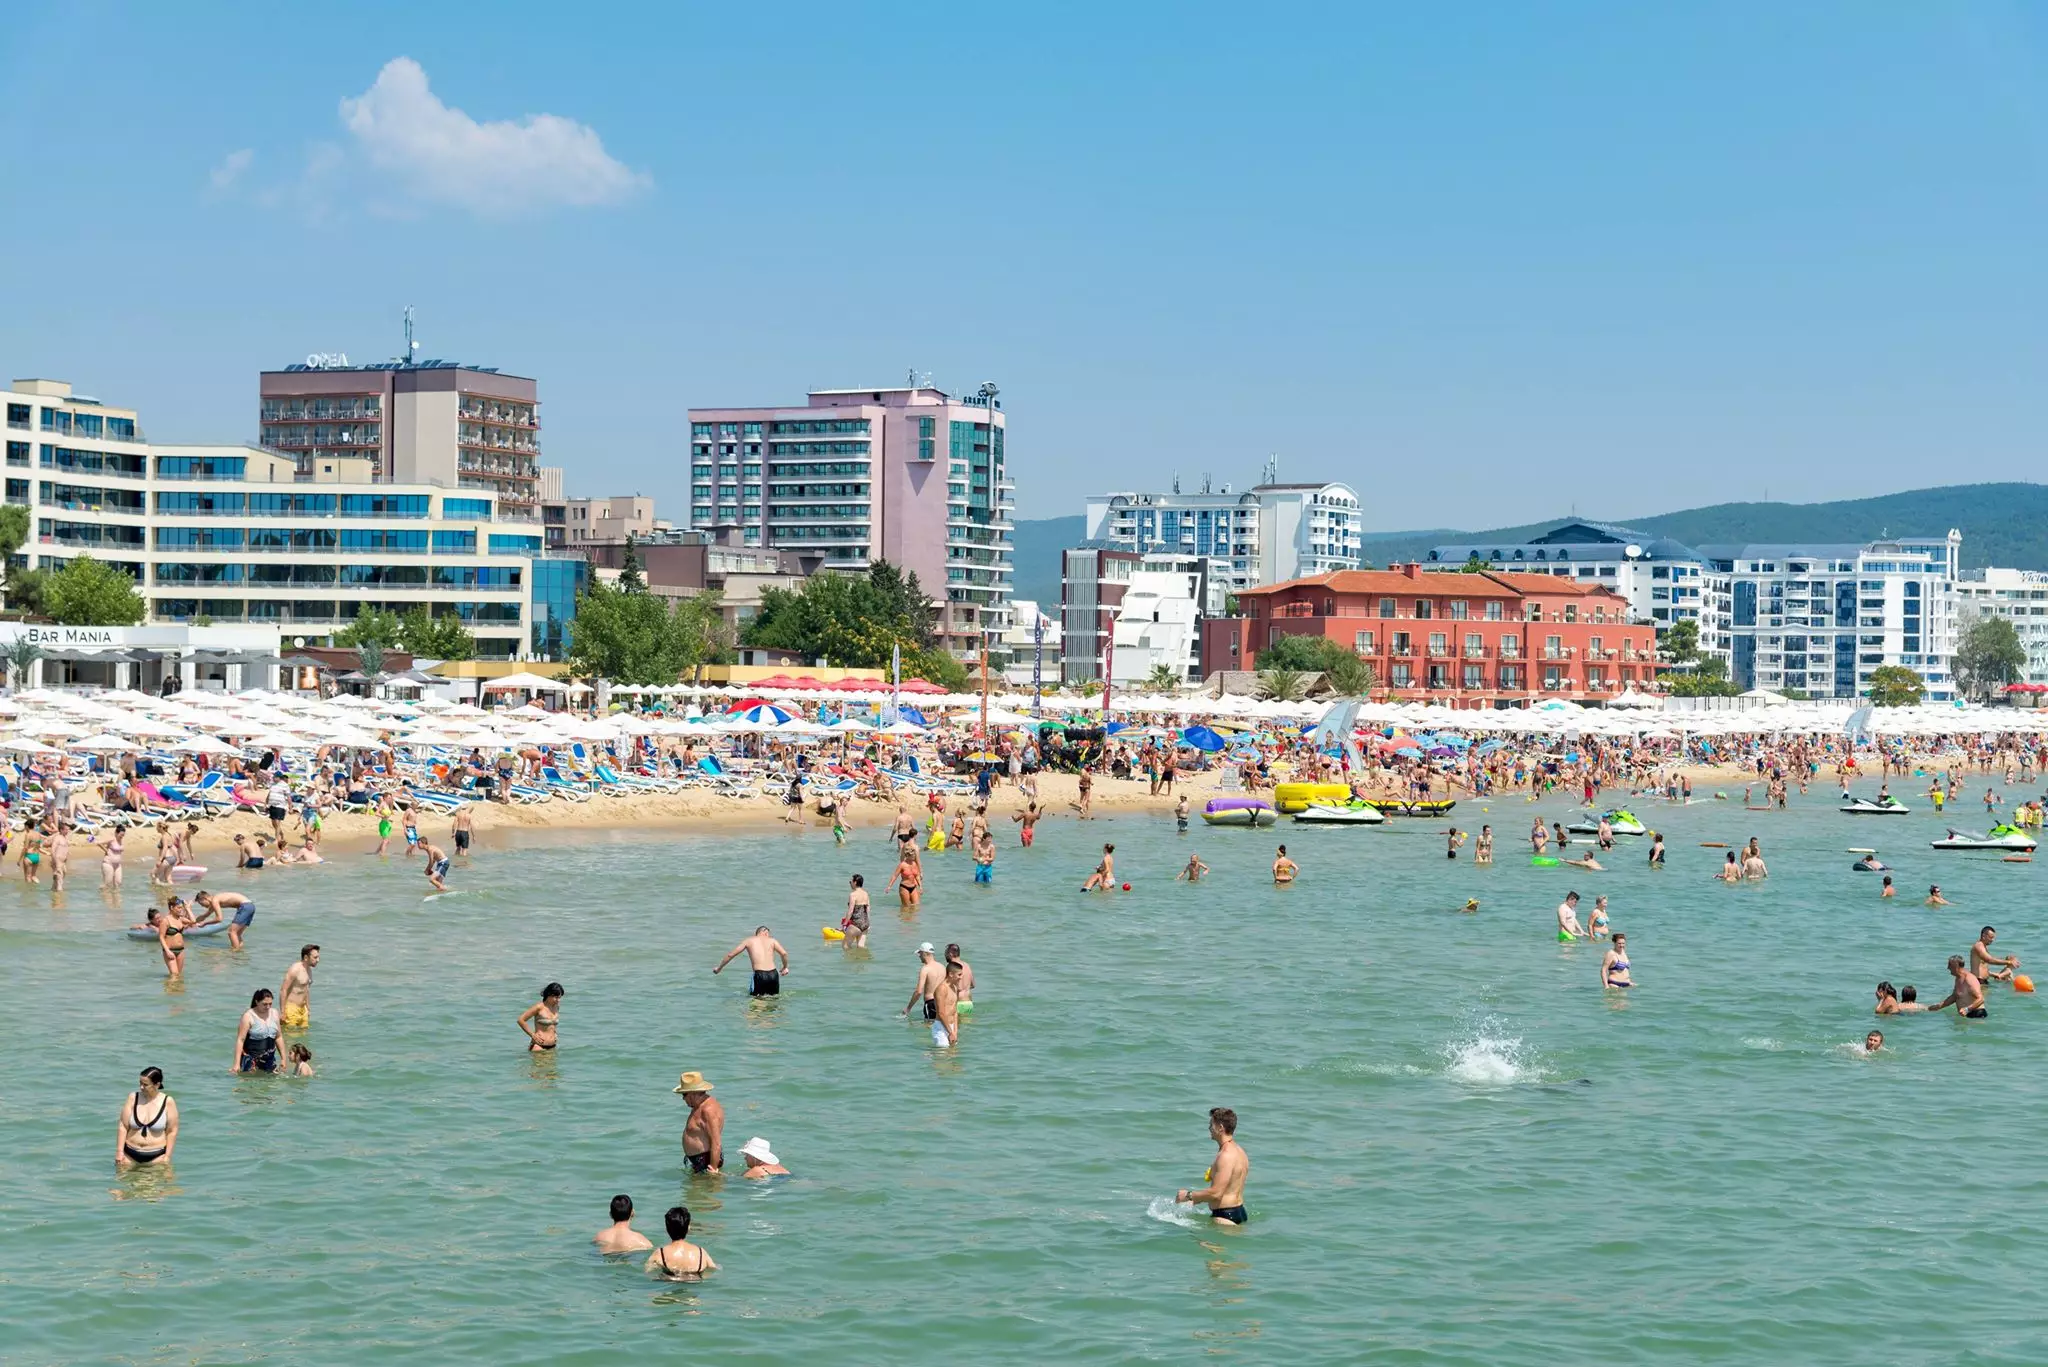 Sunny Beach in Bulgaria has become one of Europe's top party destinations.